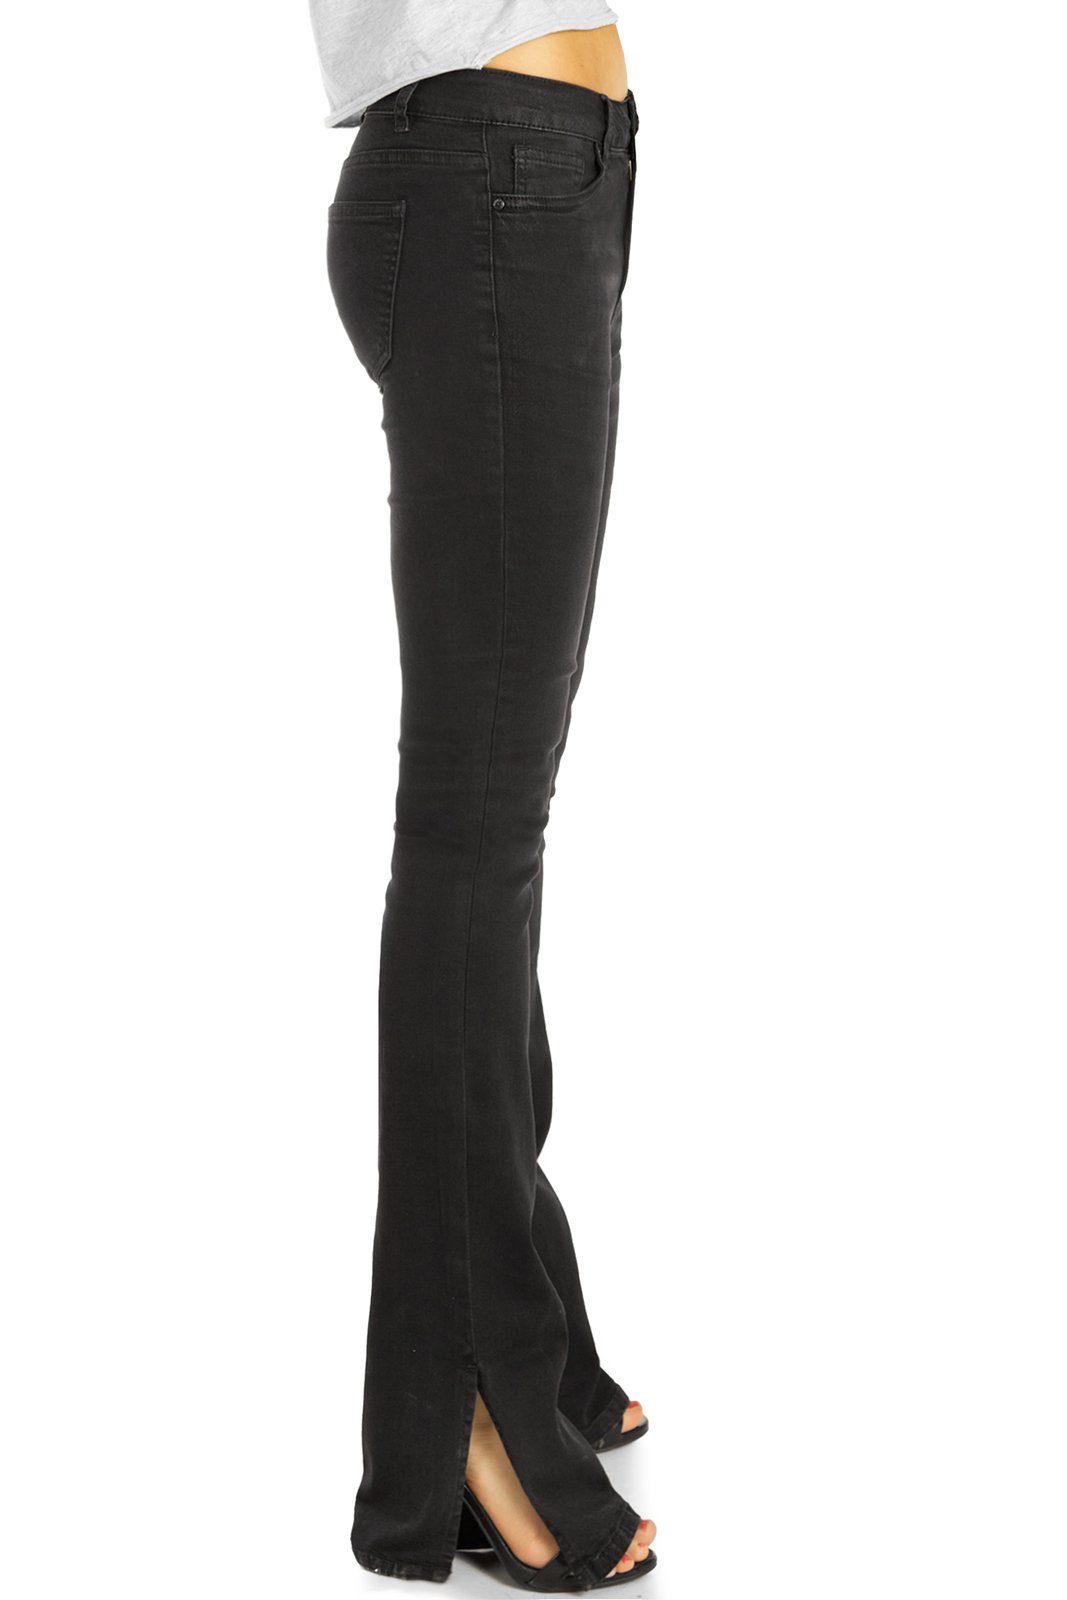 Bootcut be Stretch-Anteil, cut - mit - Bootcut-Jeans Damen mit mid 5-Pocket-Style Hose styled out waist Jeans j27r